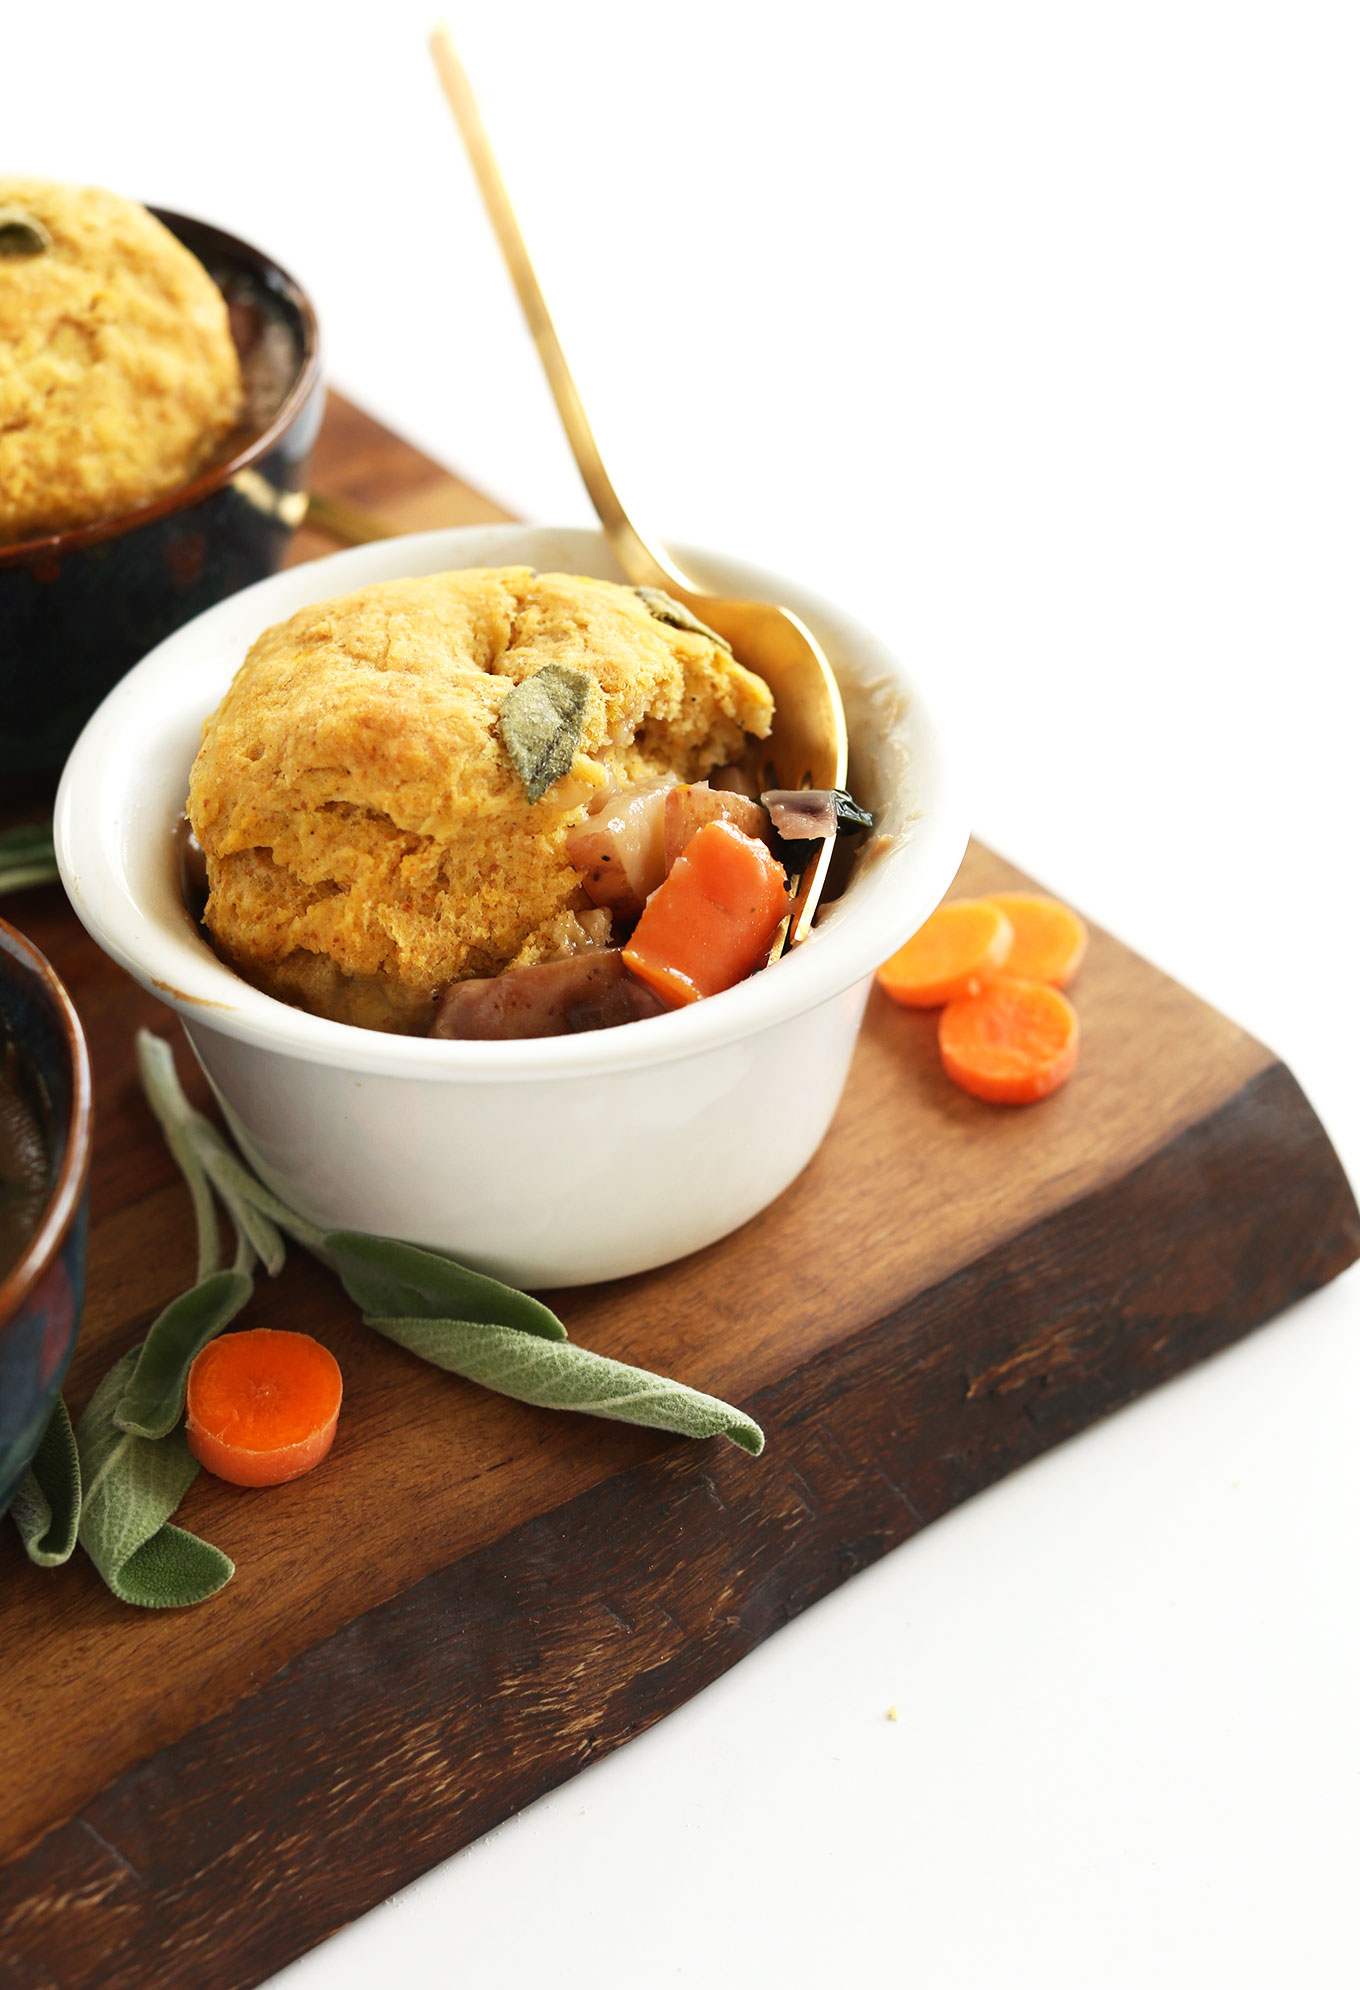 Bowls of our veggie-loaded Vegan Fall Pot Pies